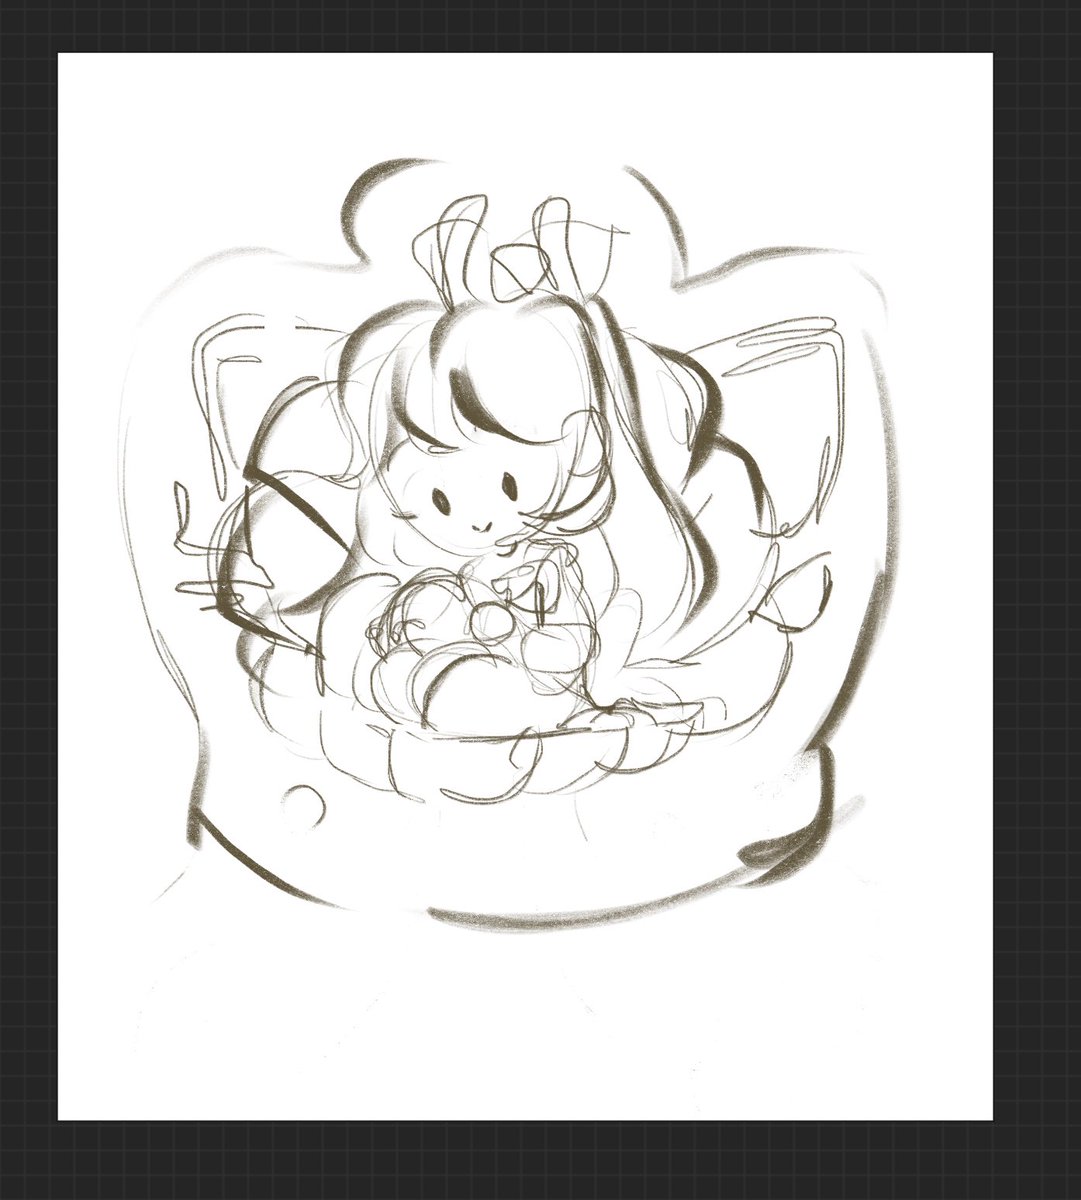 Thinking about keychains 